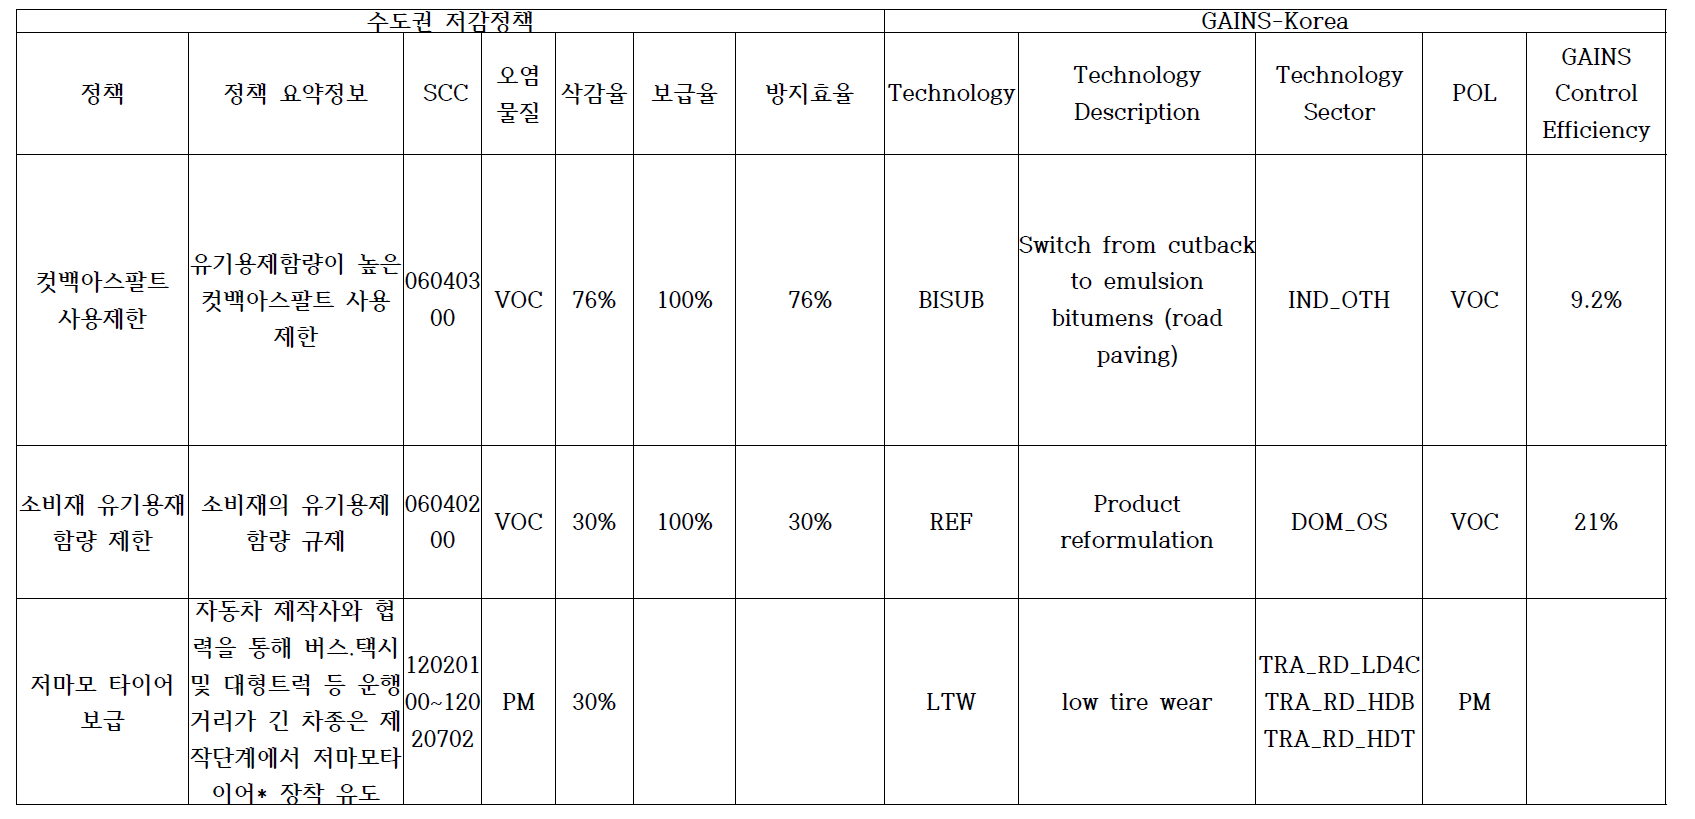 Example of policy mapping table with calculation of control efficiency in GAINS-Korea (2)